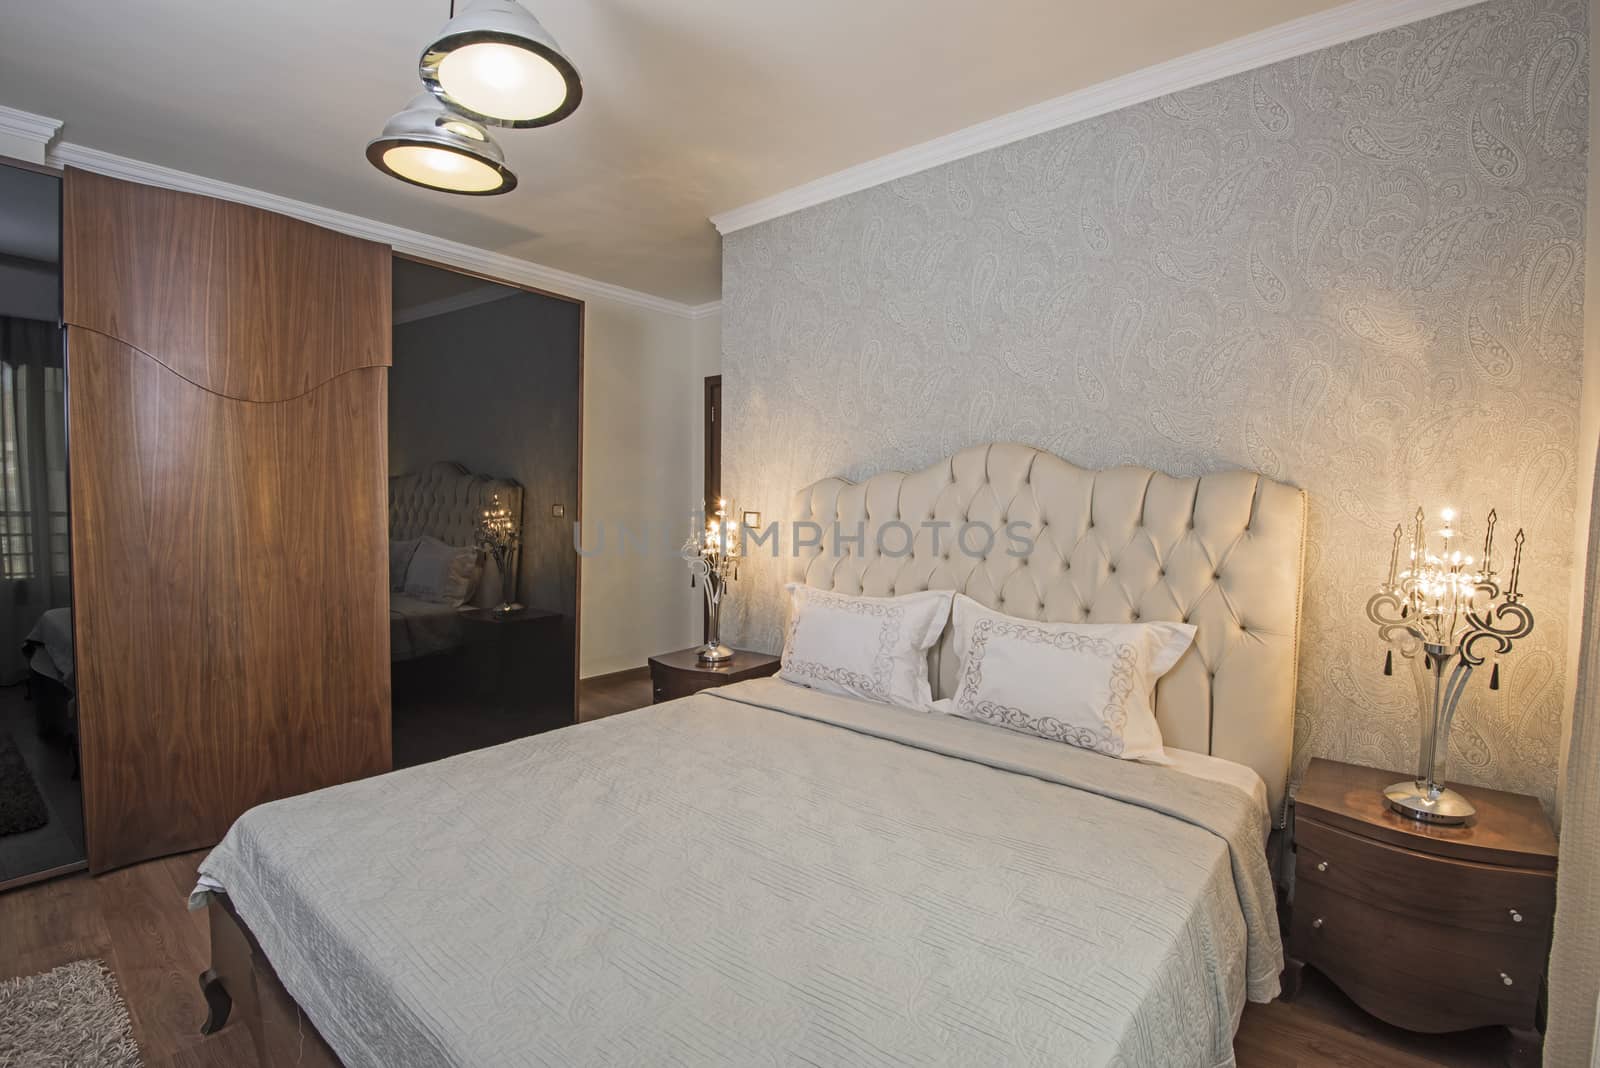 Interior design of a luxury apartment show home bedroom